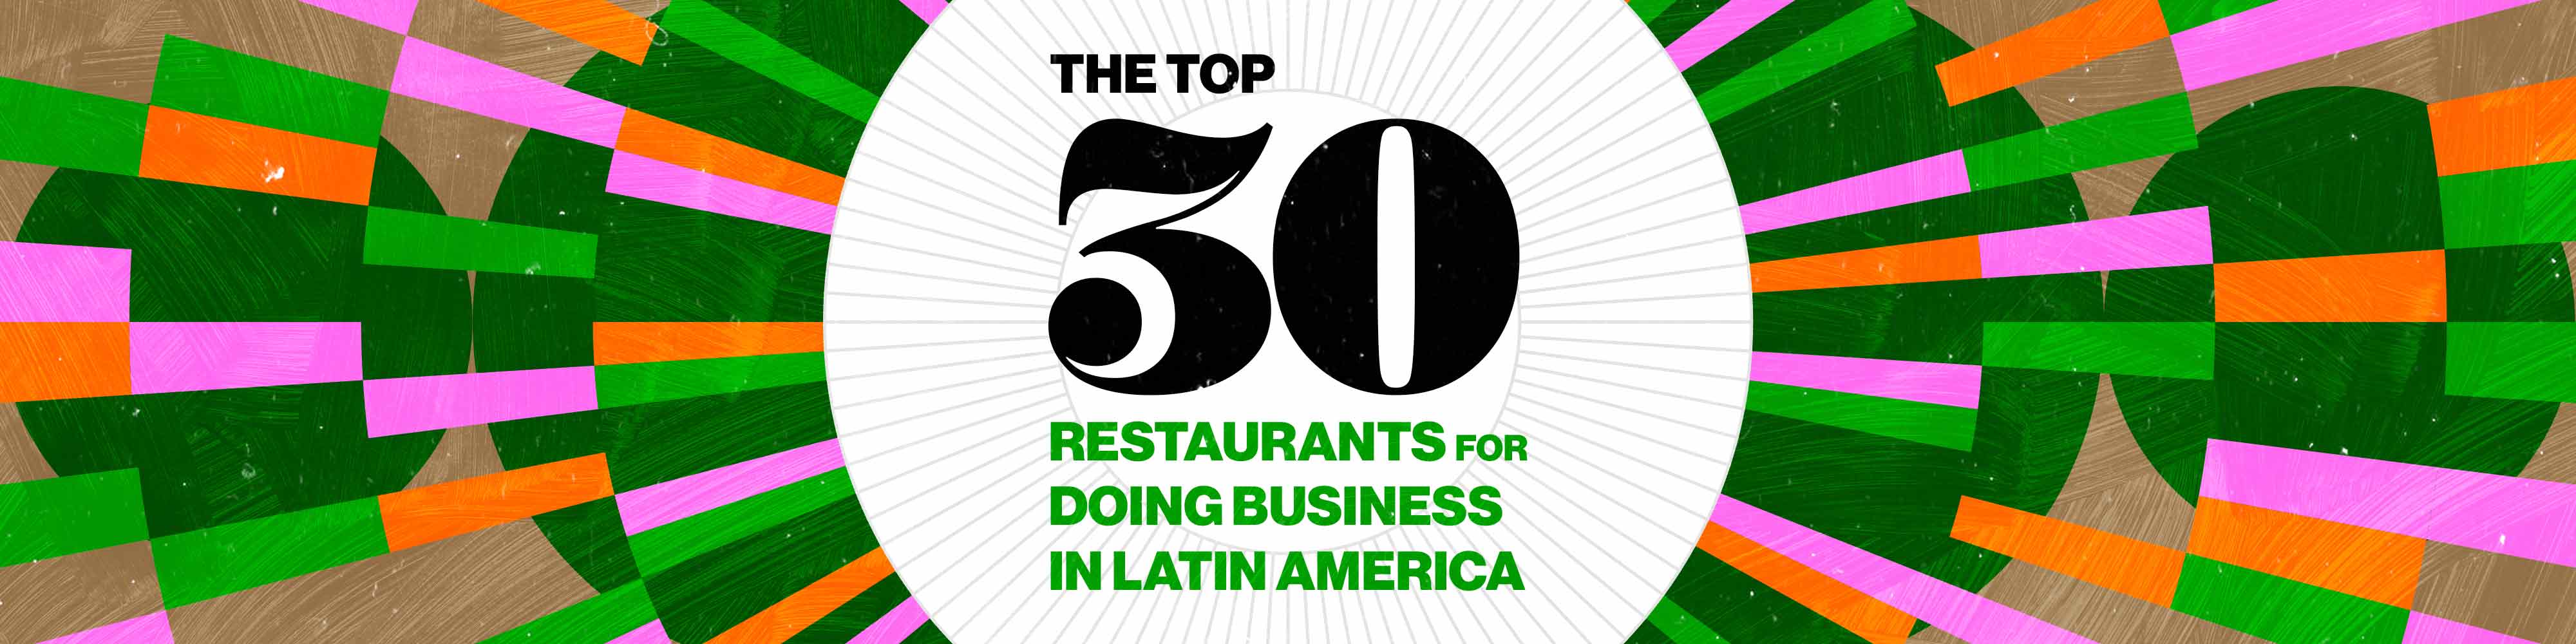 Top 30 restaurants to do business Mexico, Brazil and the region